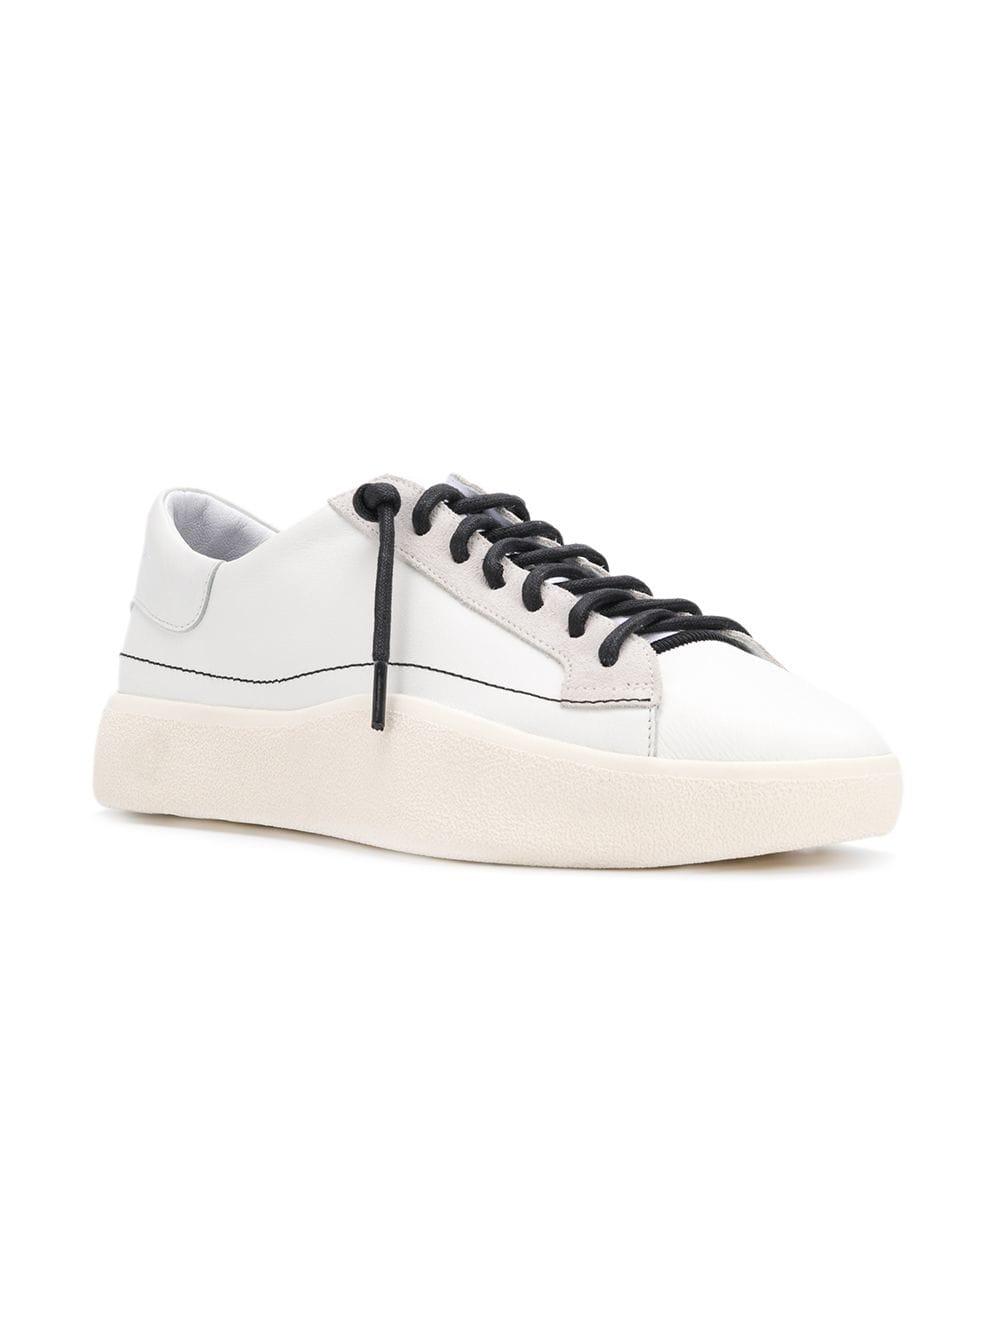 Y-3 Tangtsu Lace Sneakers in White for Men | Lyst